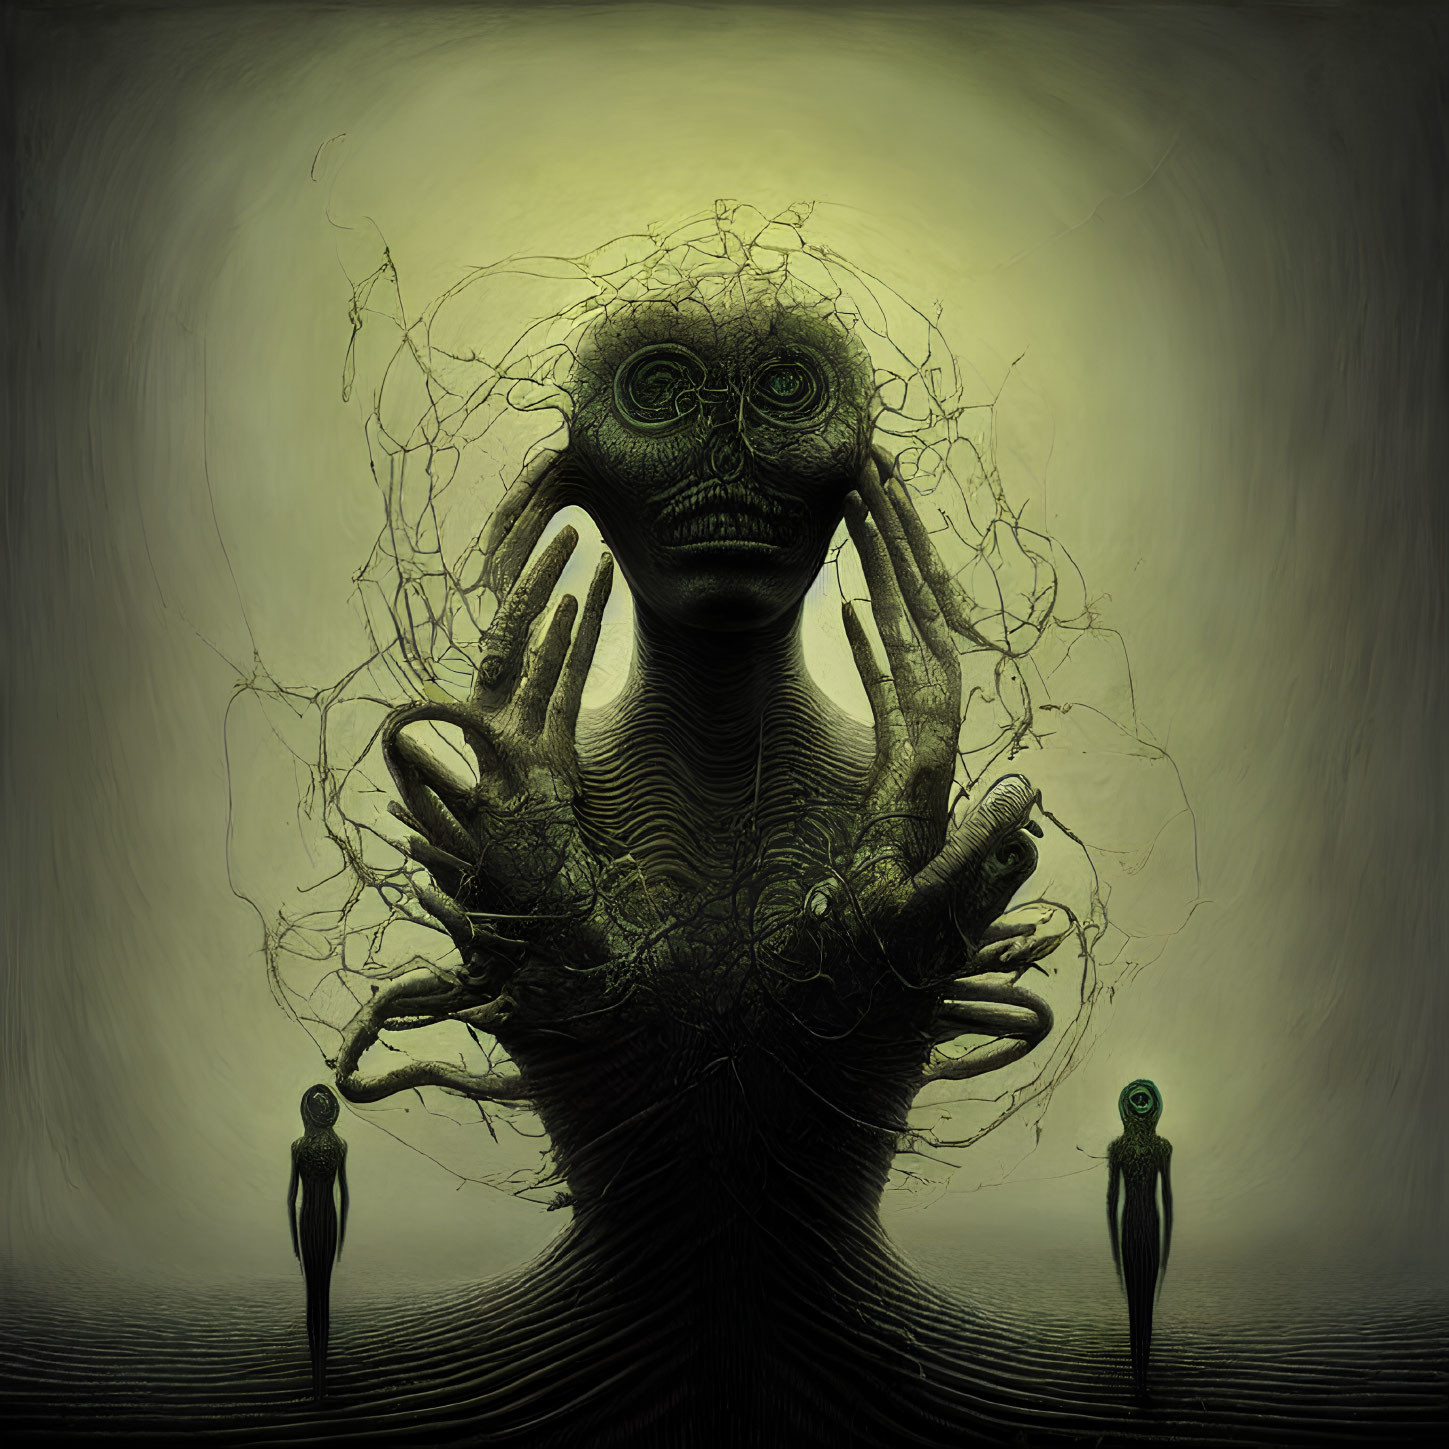 Surreal Artwork Featuring Eerie Figure and Silhouetted Figures